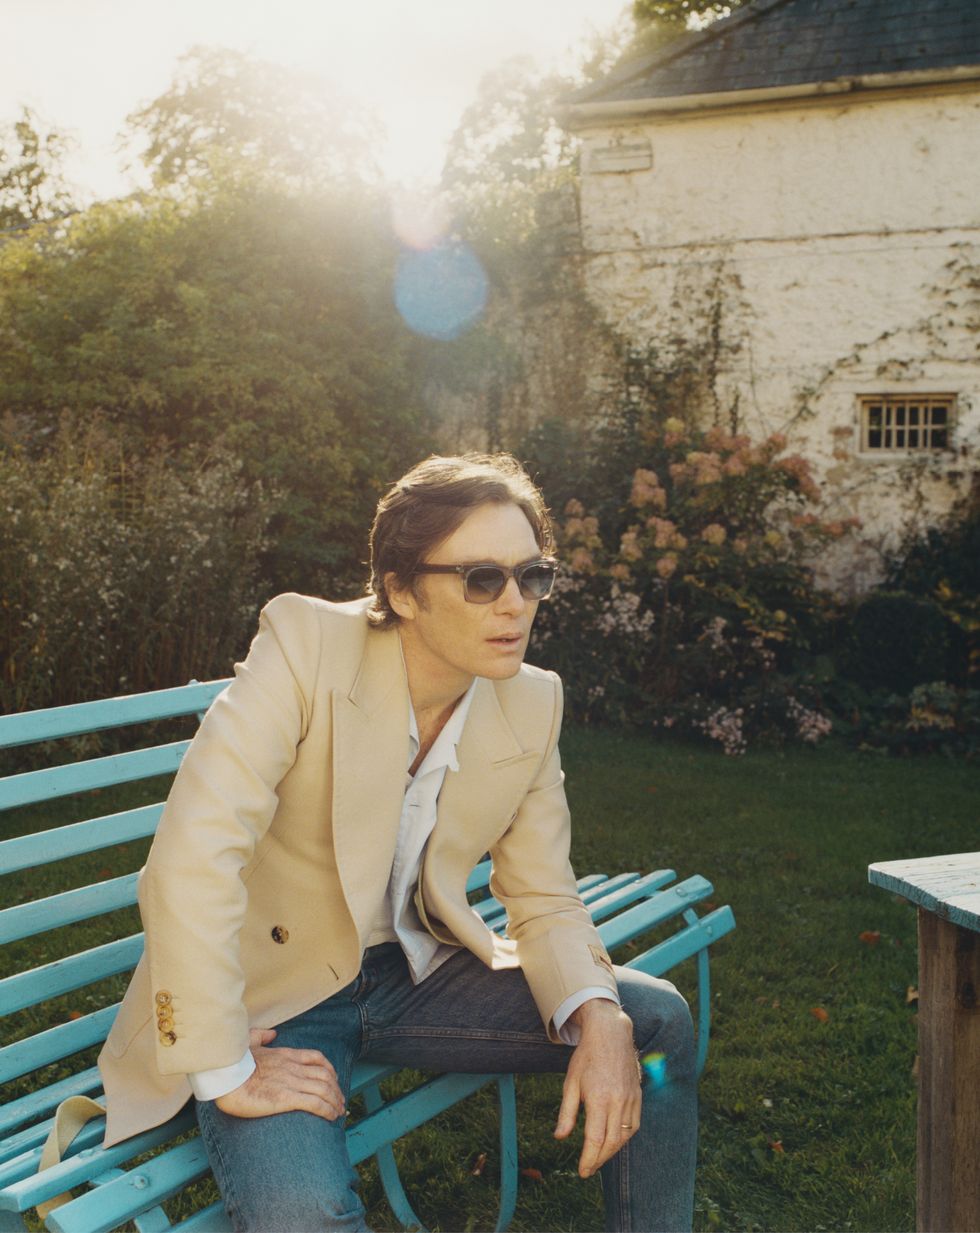 For Cillian Murphy, The Beatles' 'A Day in the Life' is 'one of